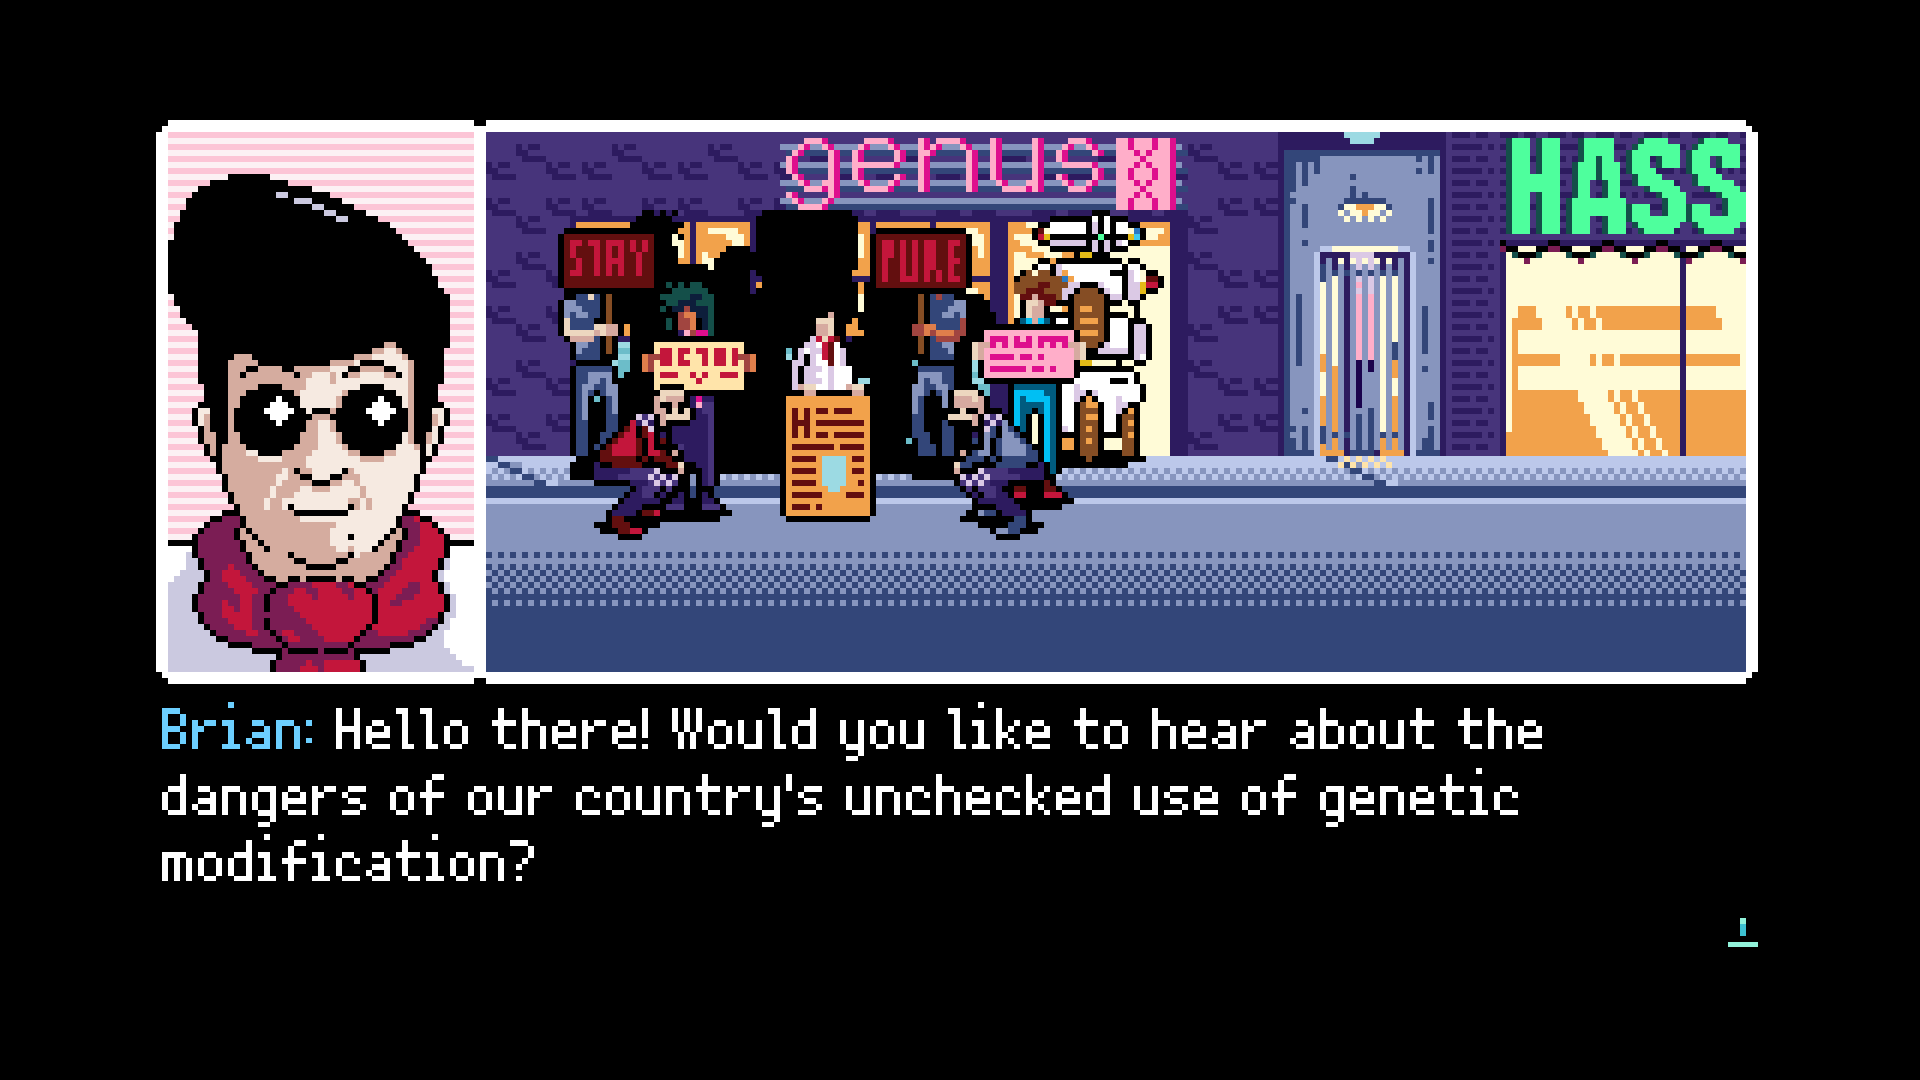 2064_ Read Only Memories_20170115020157